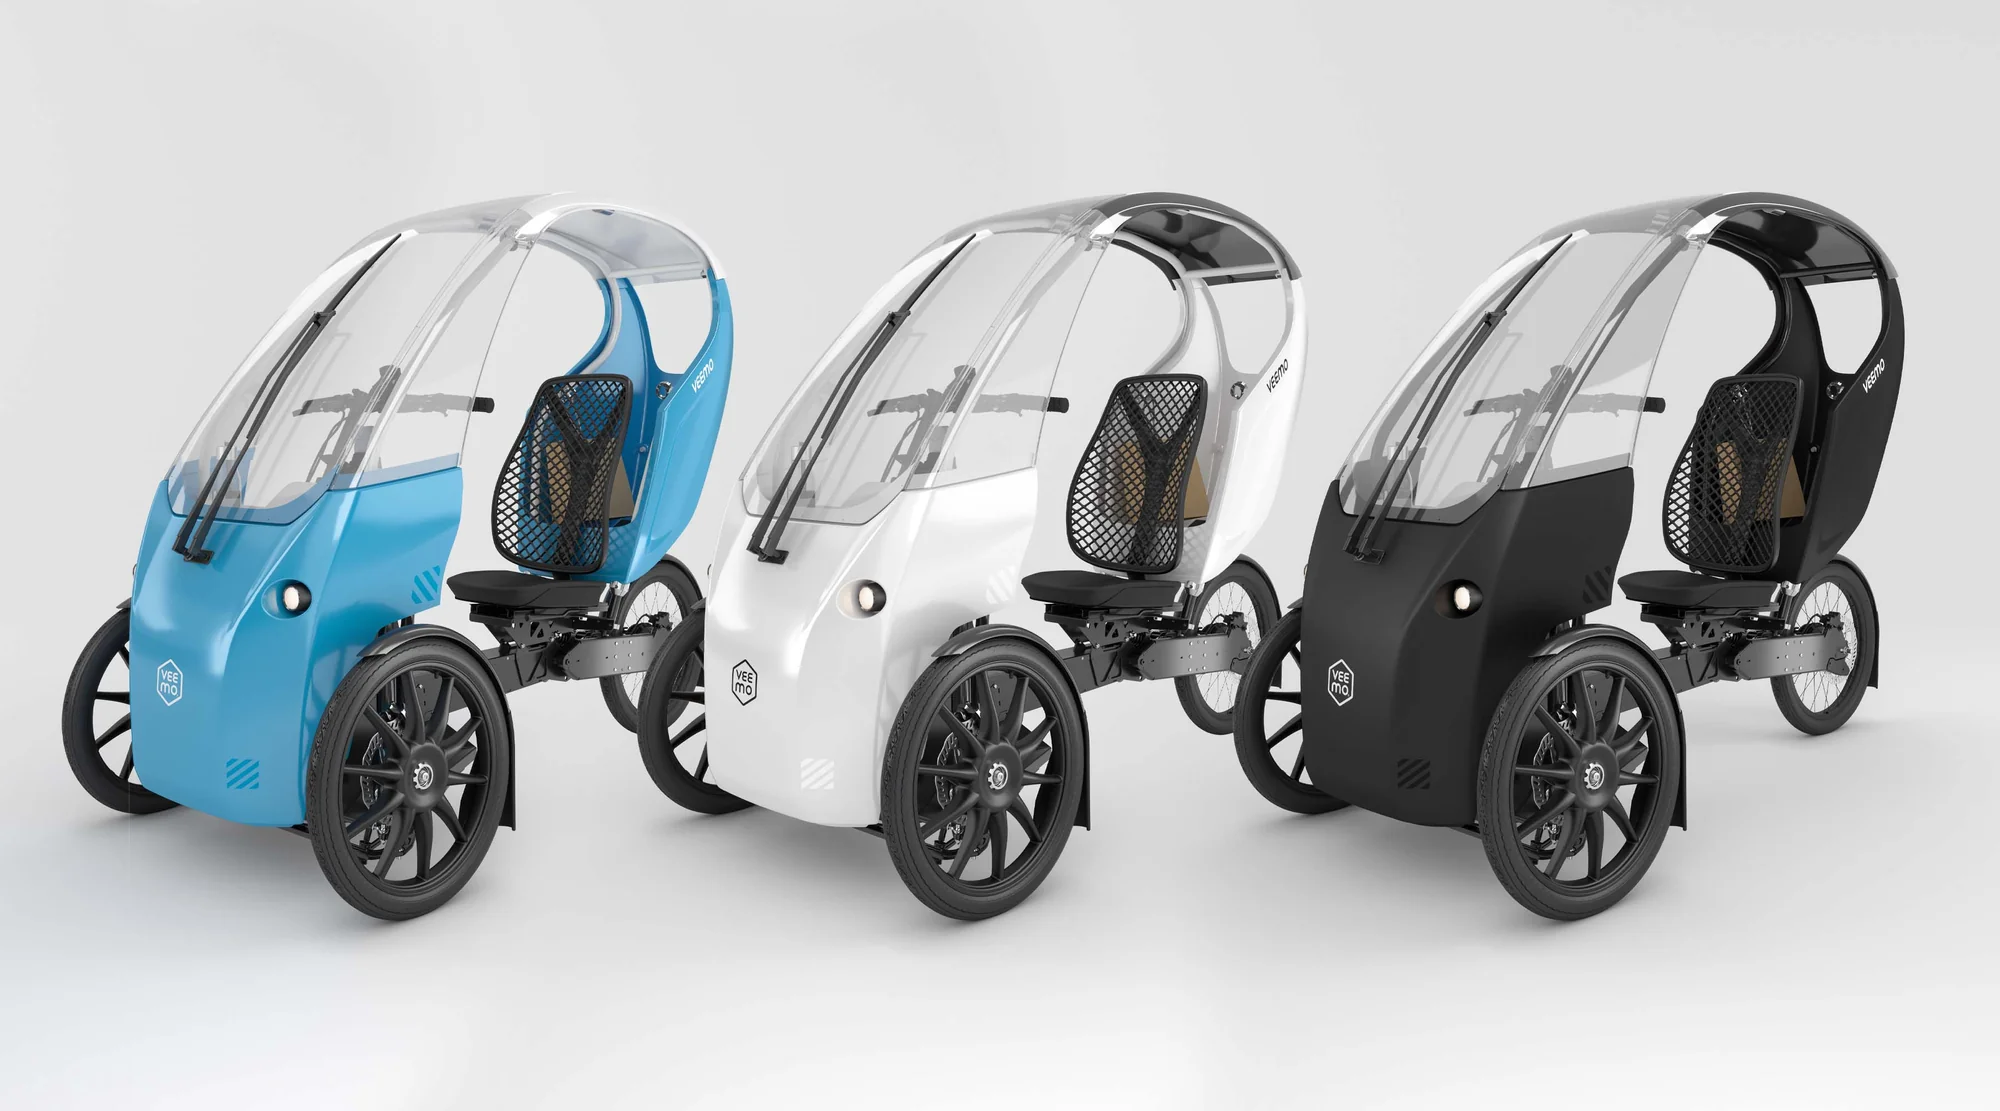 This Semi-Enclosed Electric Trike Could Make Commuting A Lot More Fun